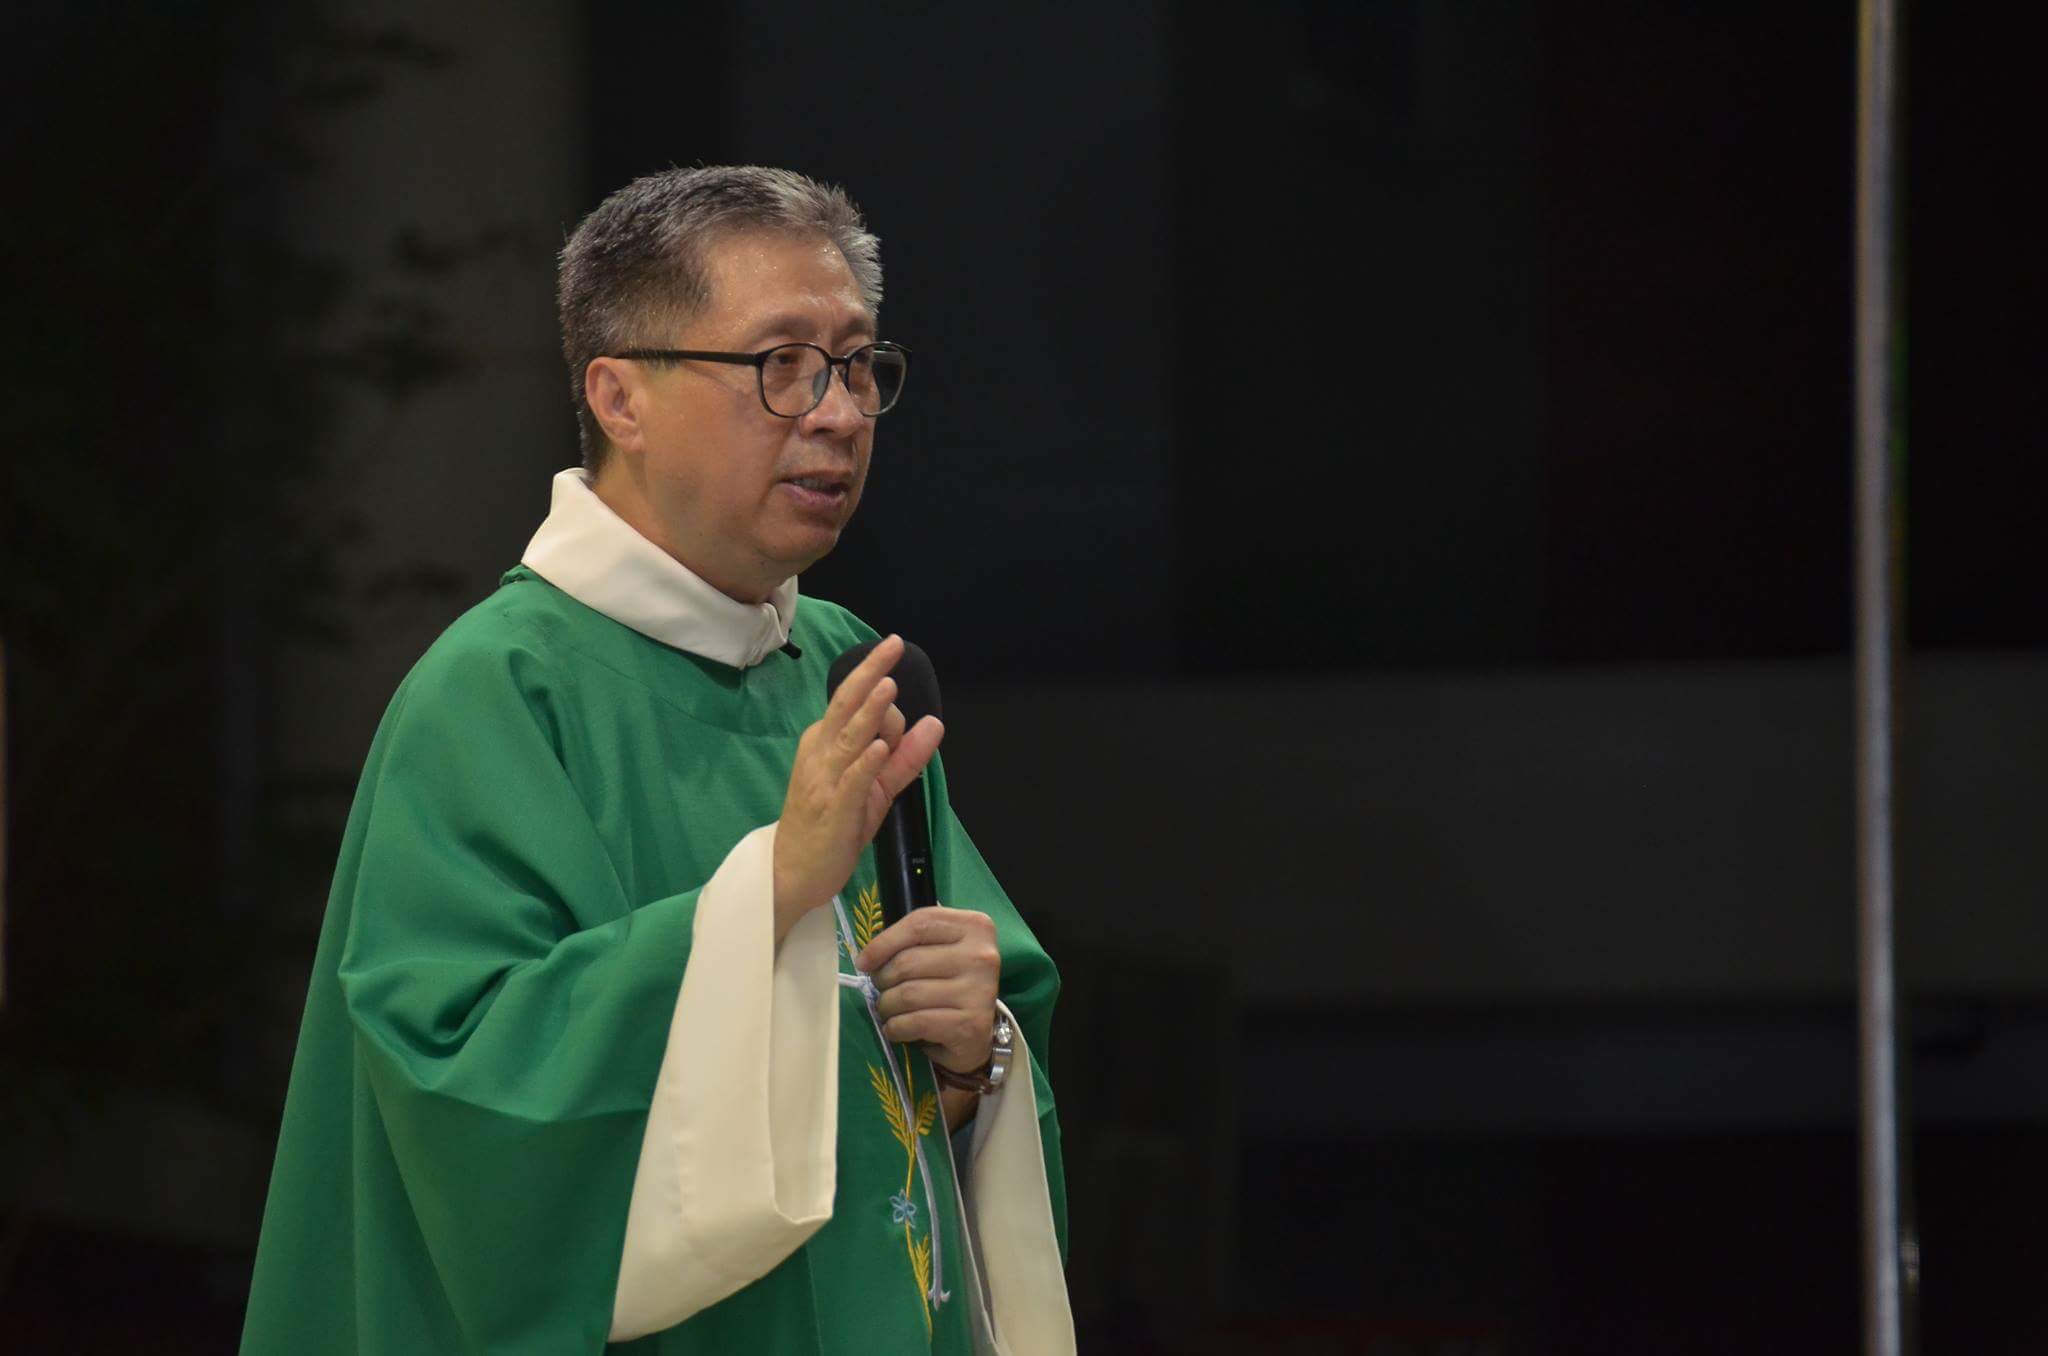 Fr. Dave Concepcion, EVERYTHING IS GRACE 